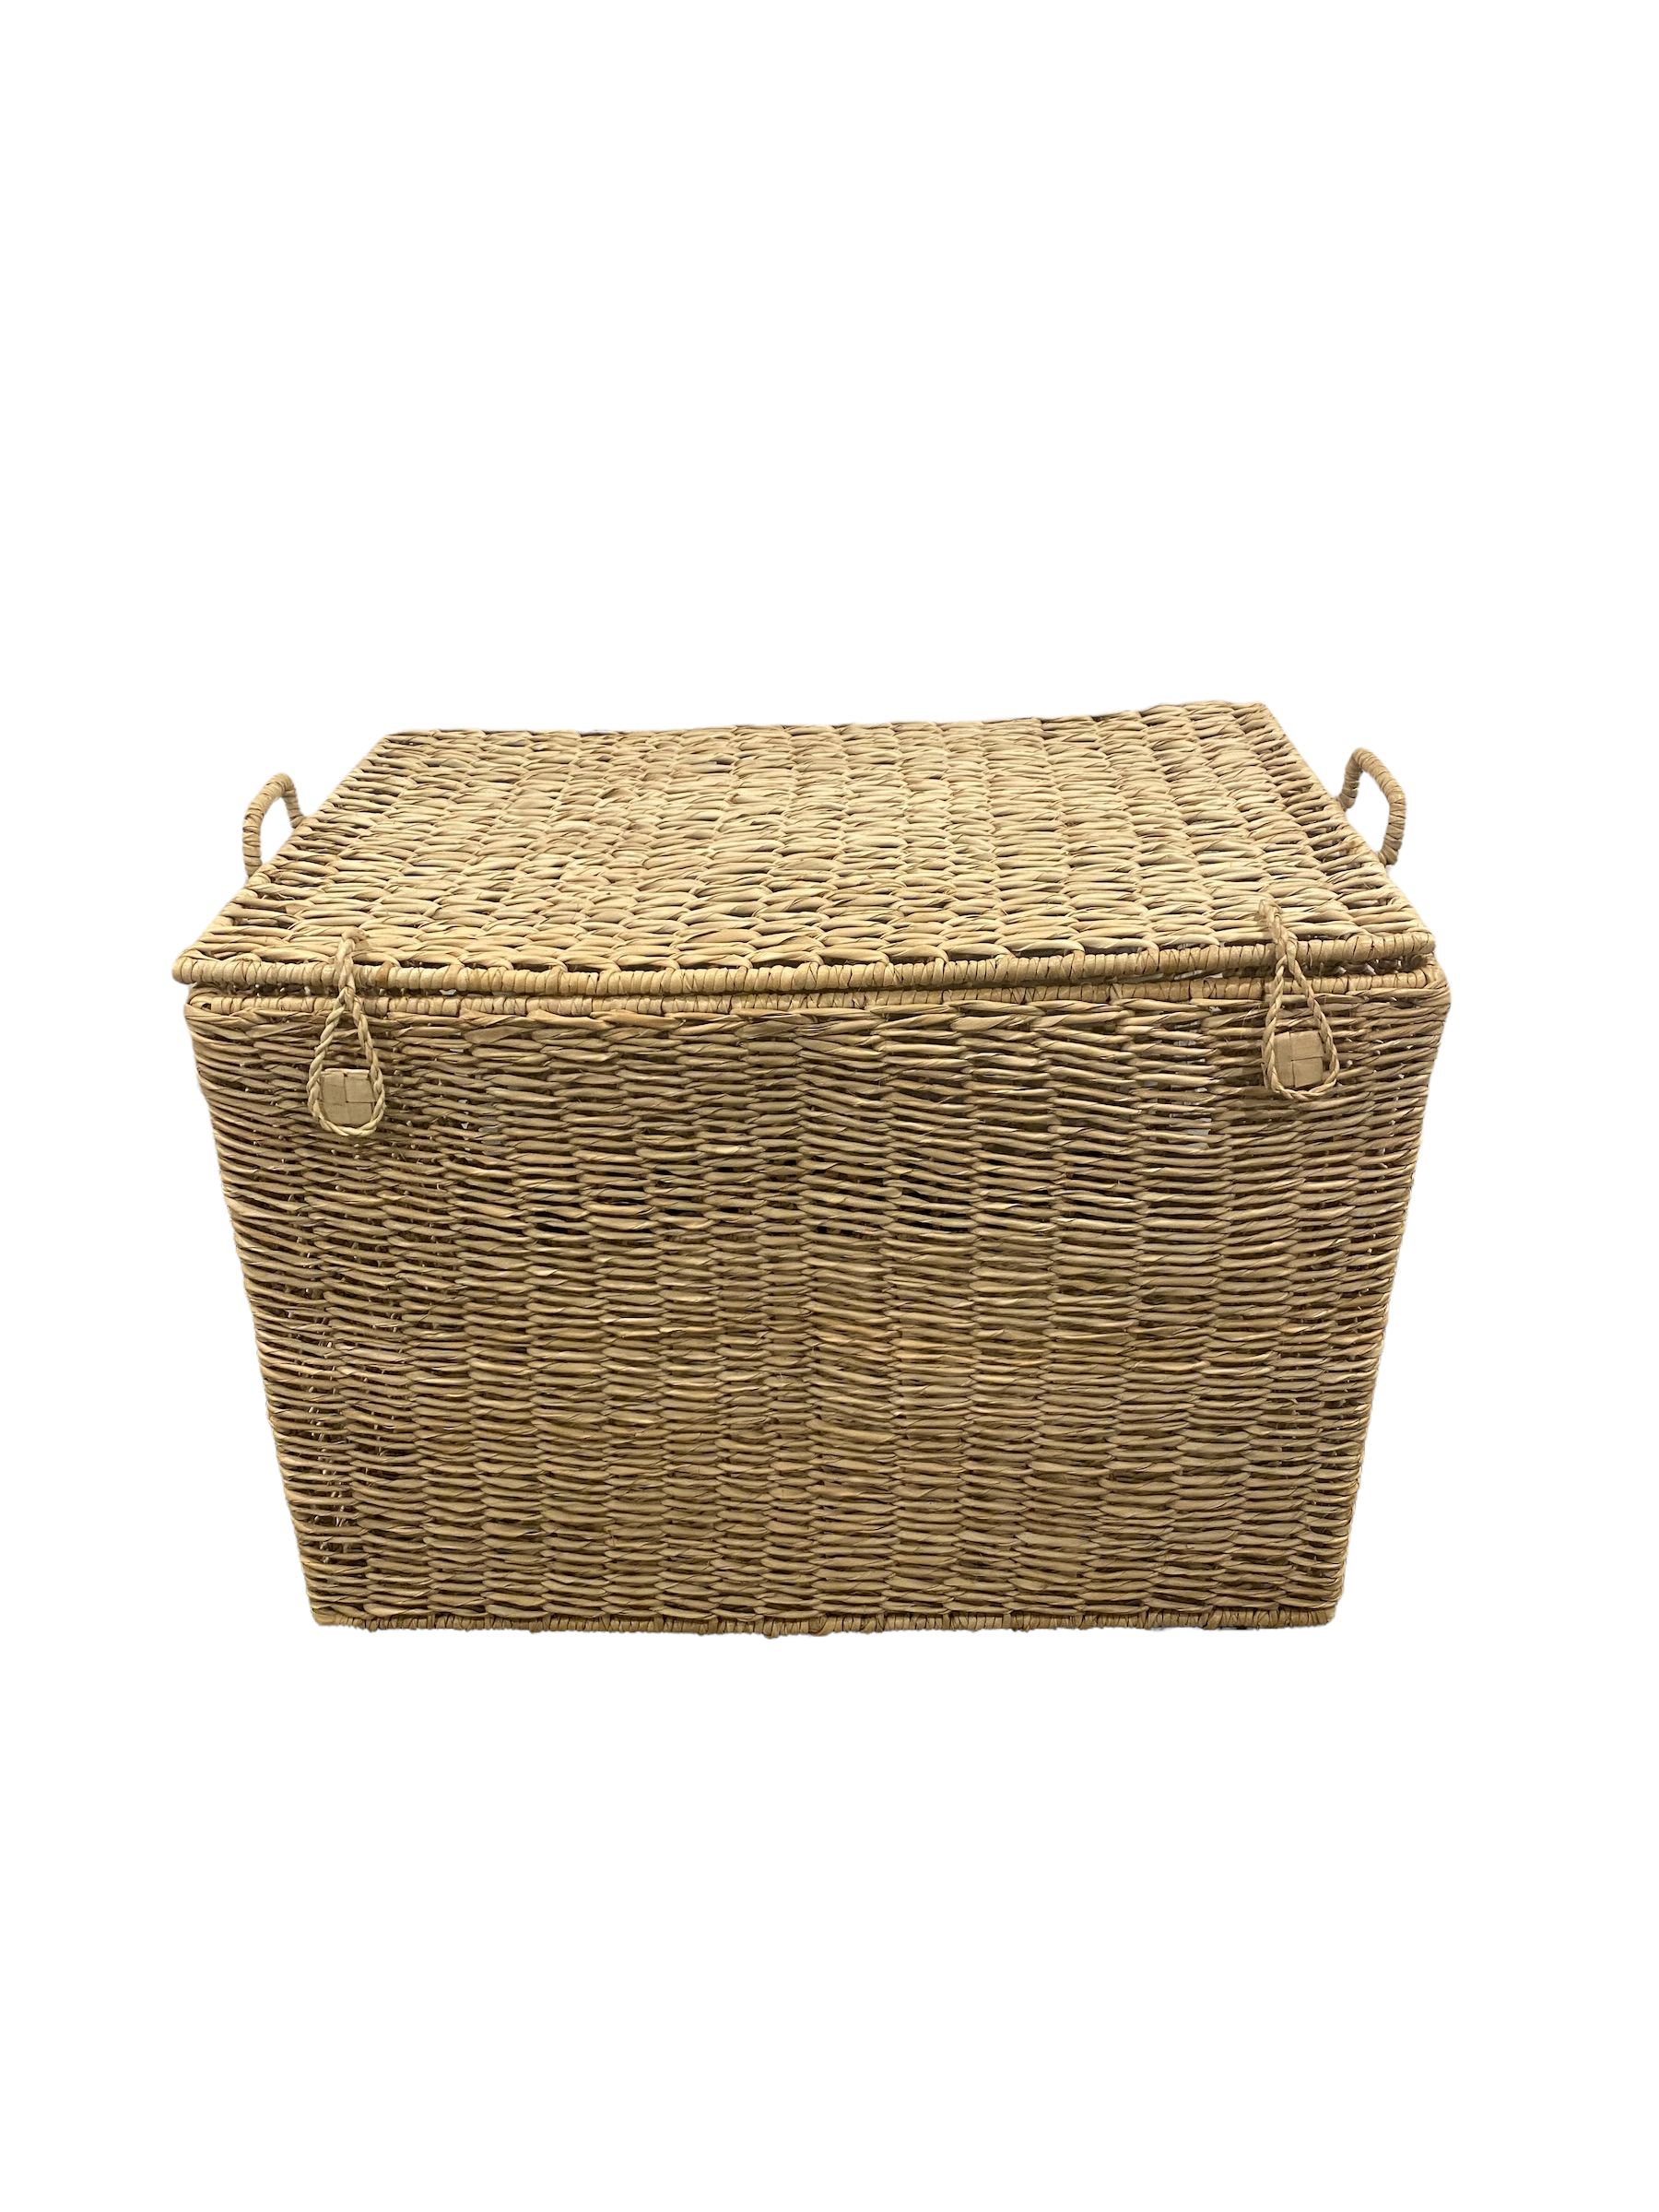 Palm leaf hand woven chest - (MZB01)